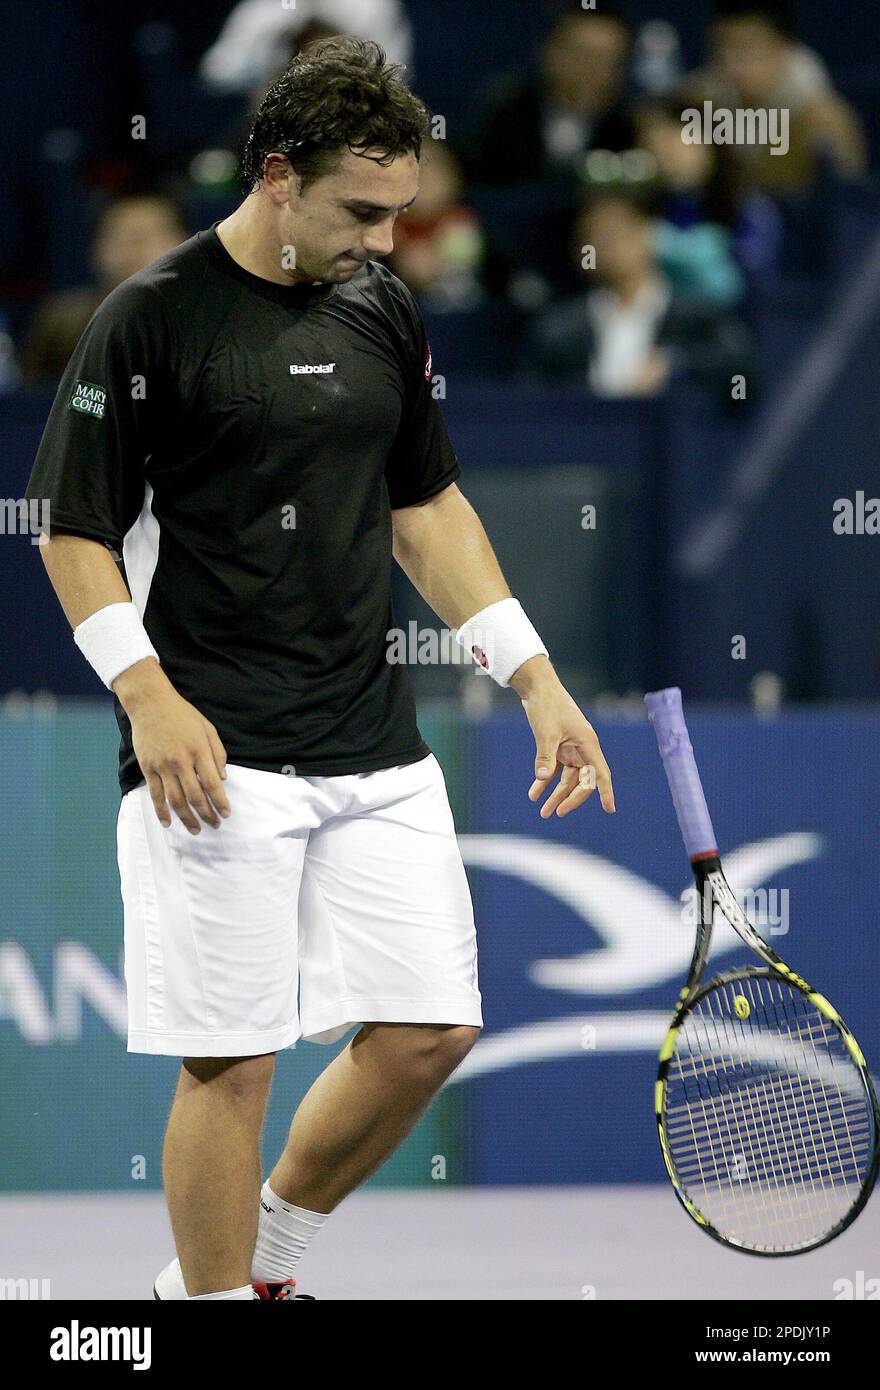 Mariano Puerta of Argentina throws his racket after losing a point during a  second singles match against Fernando Gonzalez of Chile for the Shanghai  Tennis Masters Cup Wednesday, Nov. 16, 2005 at